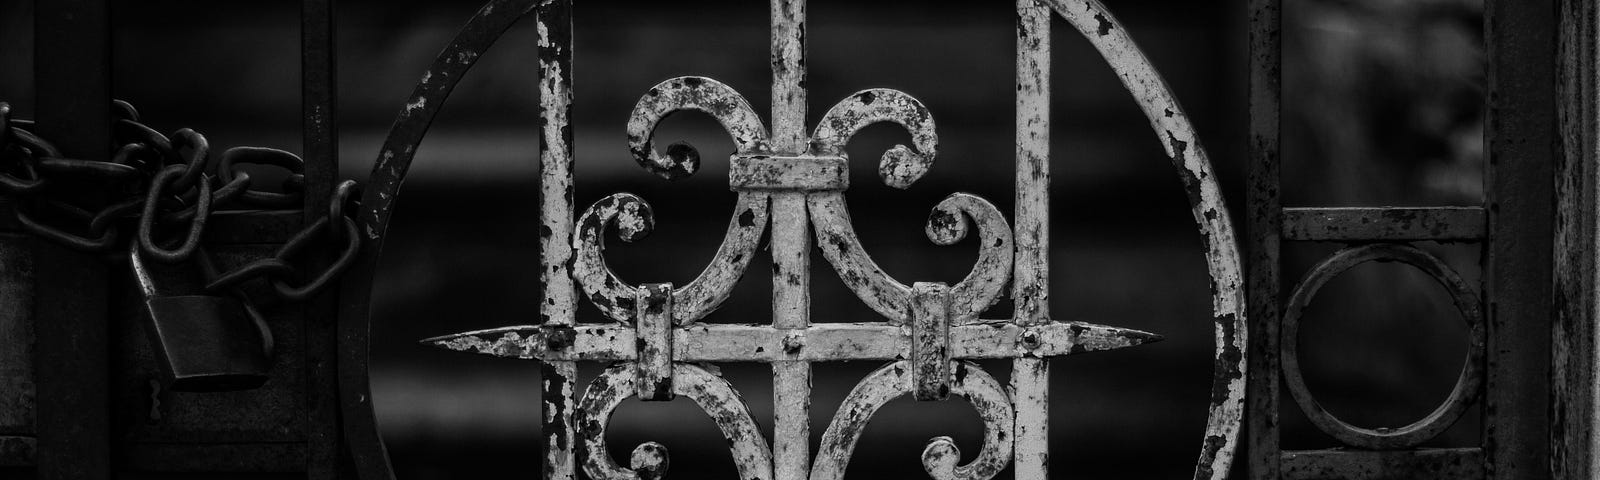 A wrought-iron gate